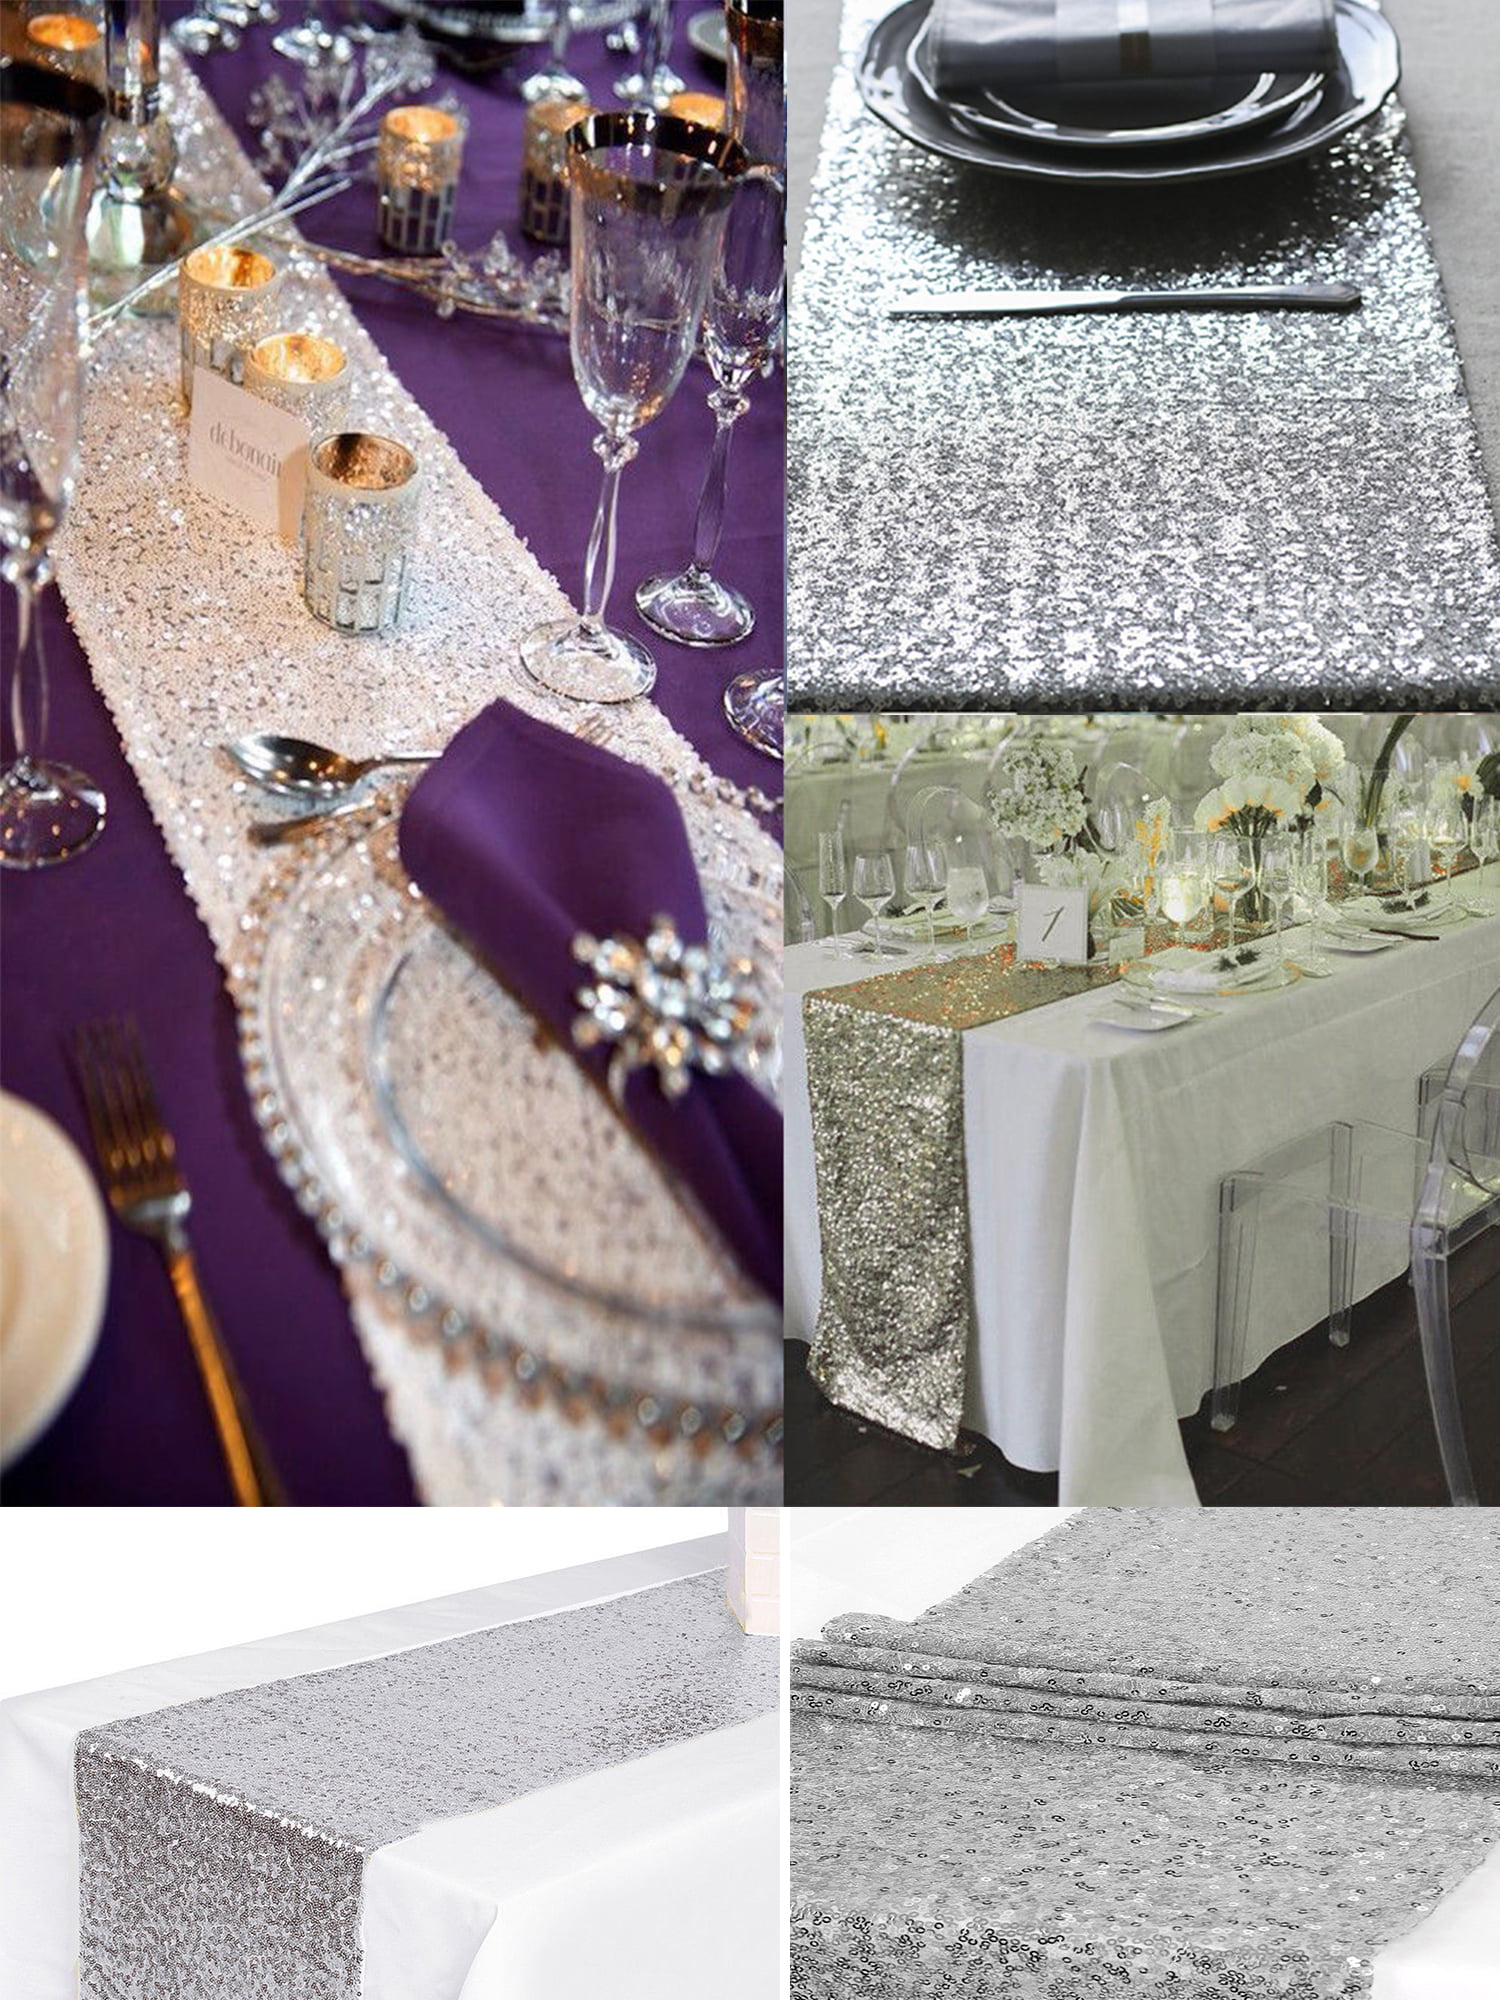 Sequin Table Runner Tablecloth Xmas Party Wedding Decorations 12"x72''/108"/118"